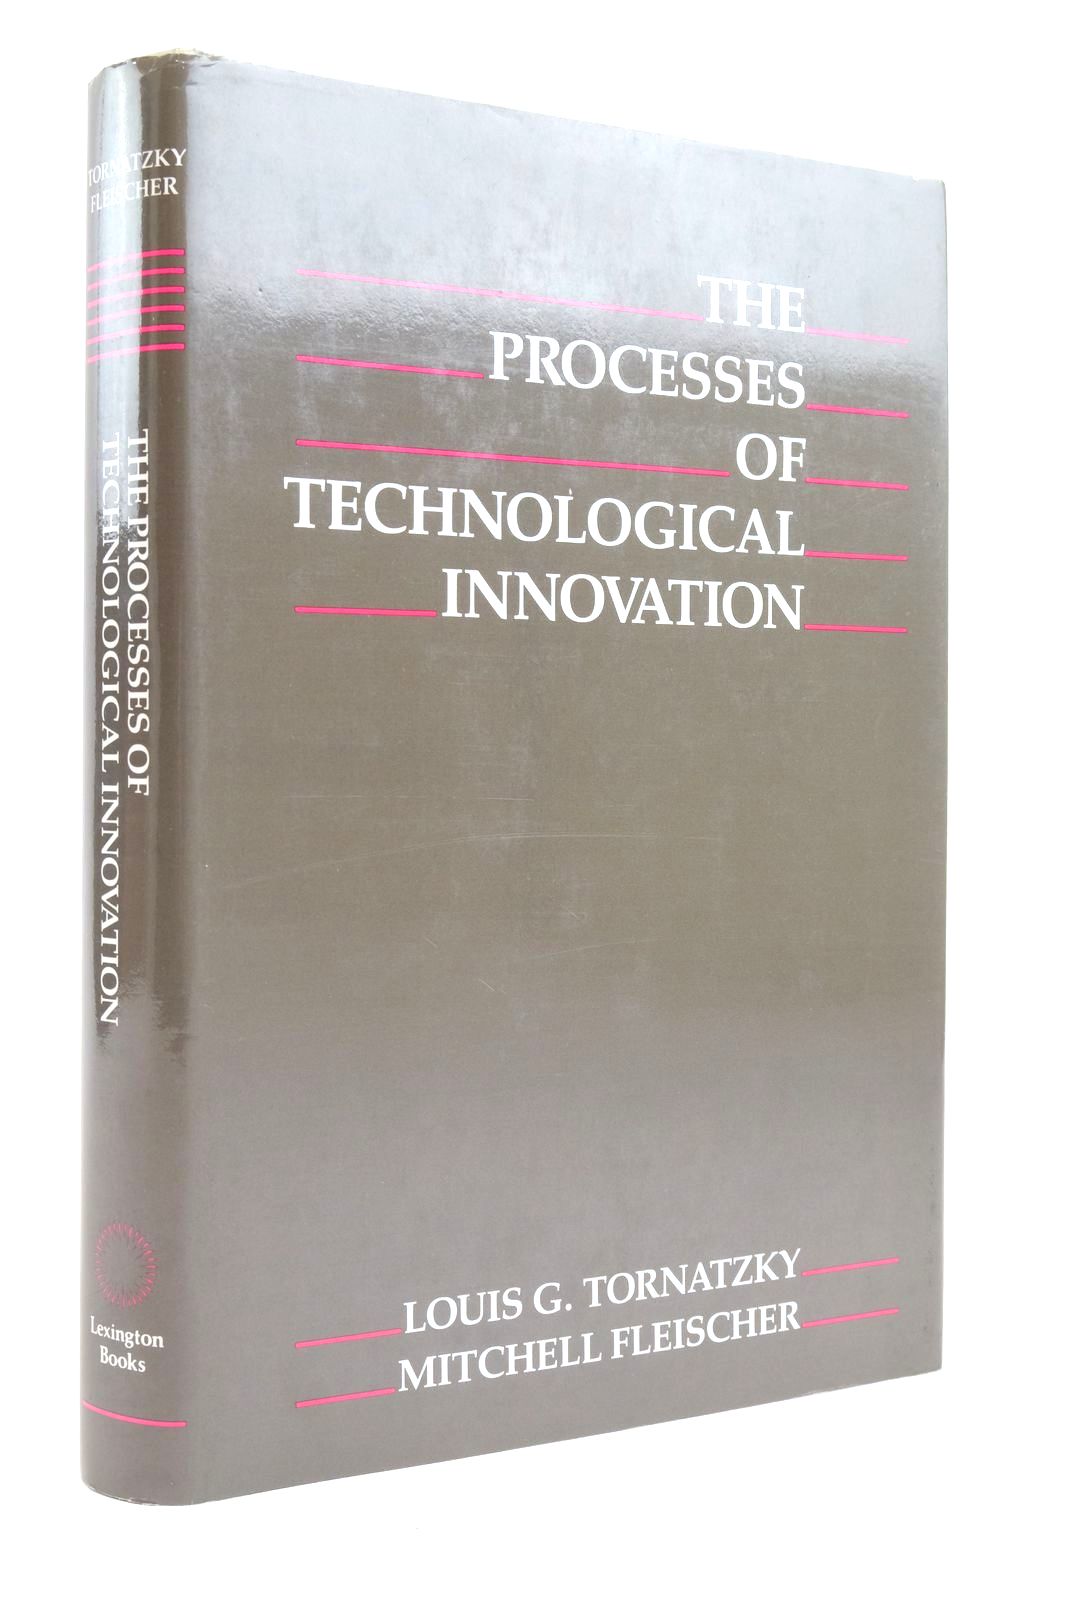 Photo of THE PROCESS OF TECHNOLOGICAL INNOVATION- Stock Number: 2136233